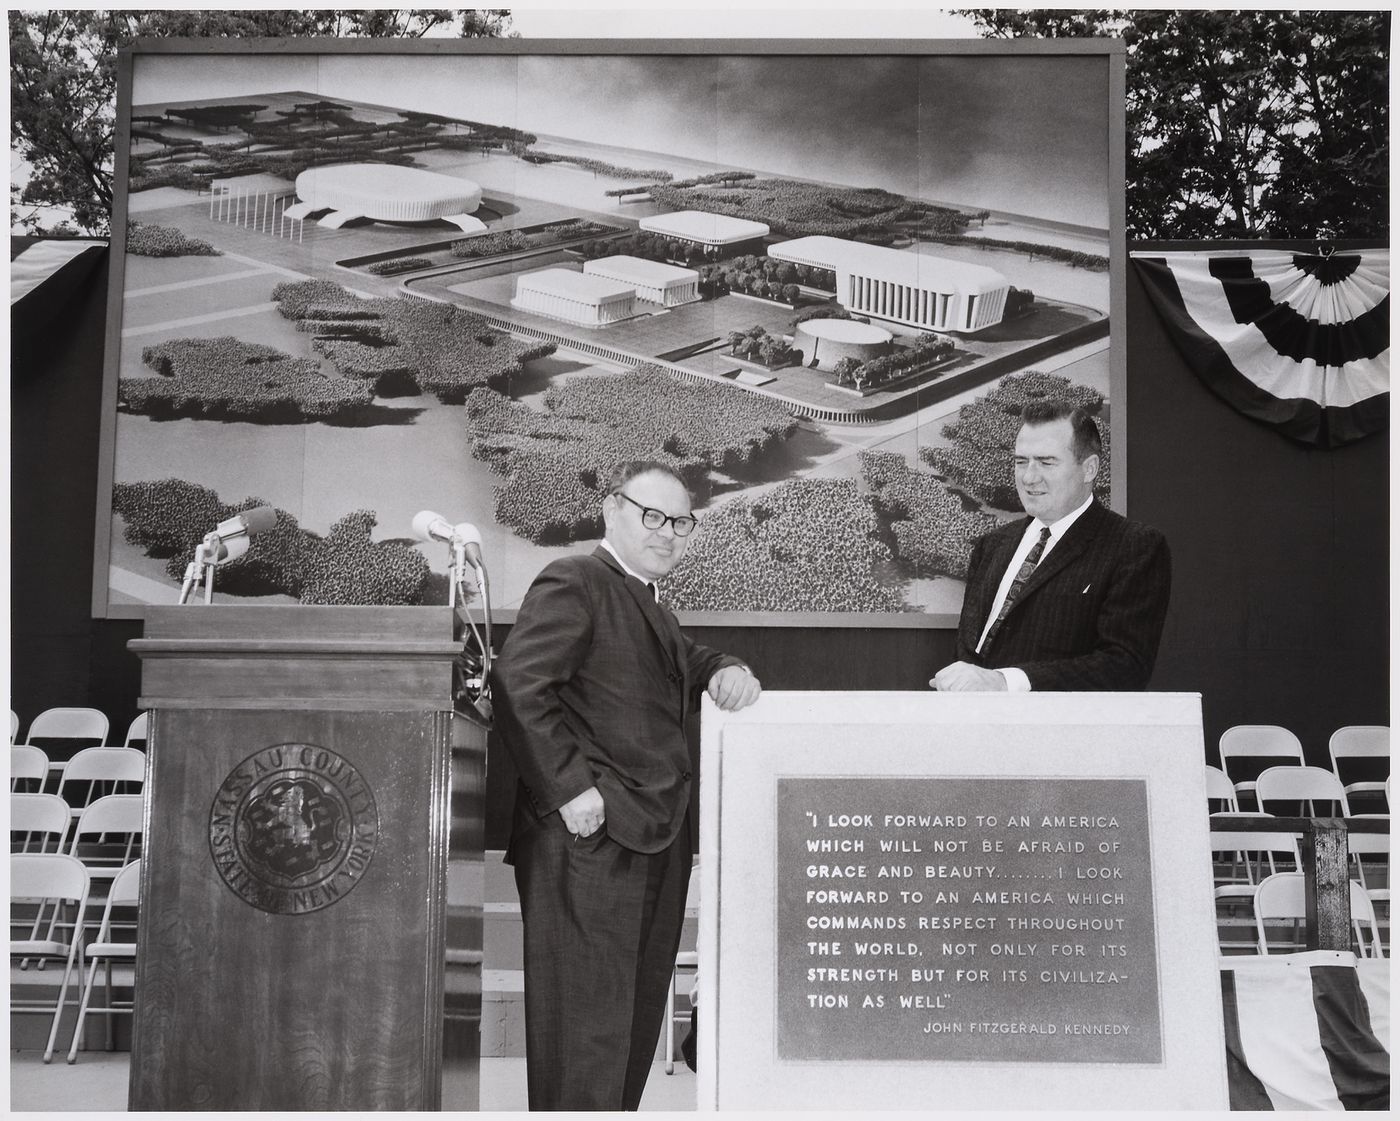 View of the dedication ceremony of the John F. Kennedy Educational, Civic and Cultural Center showing the memorial plaque with a quote by John F. Kennedy, two men and a photograph of the model of the building, Mineola, New York